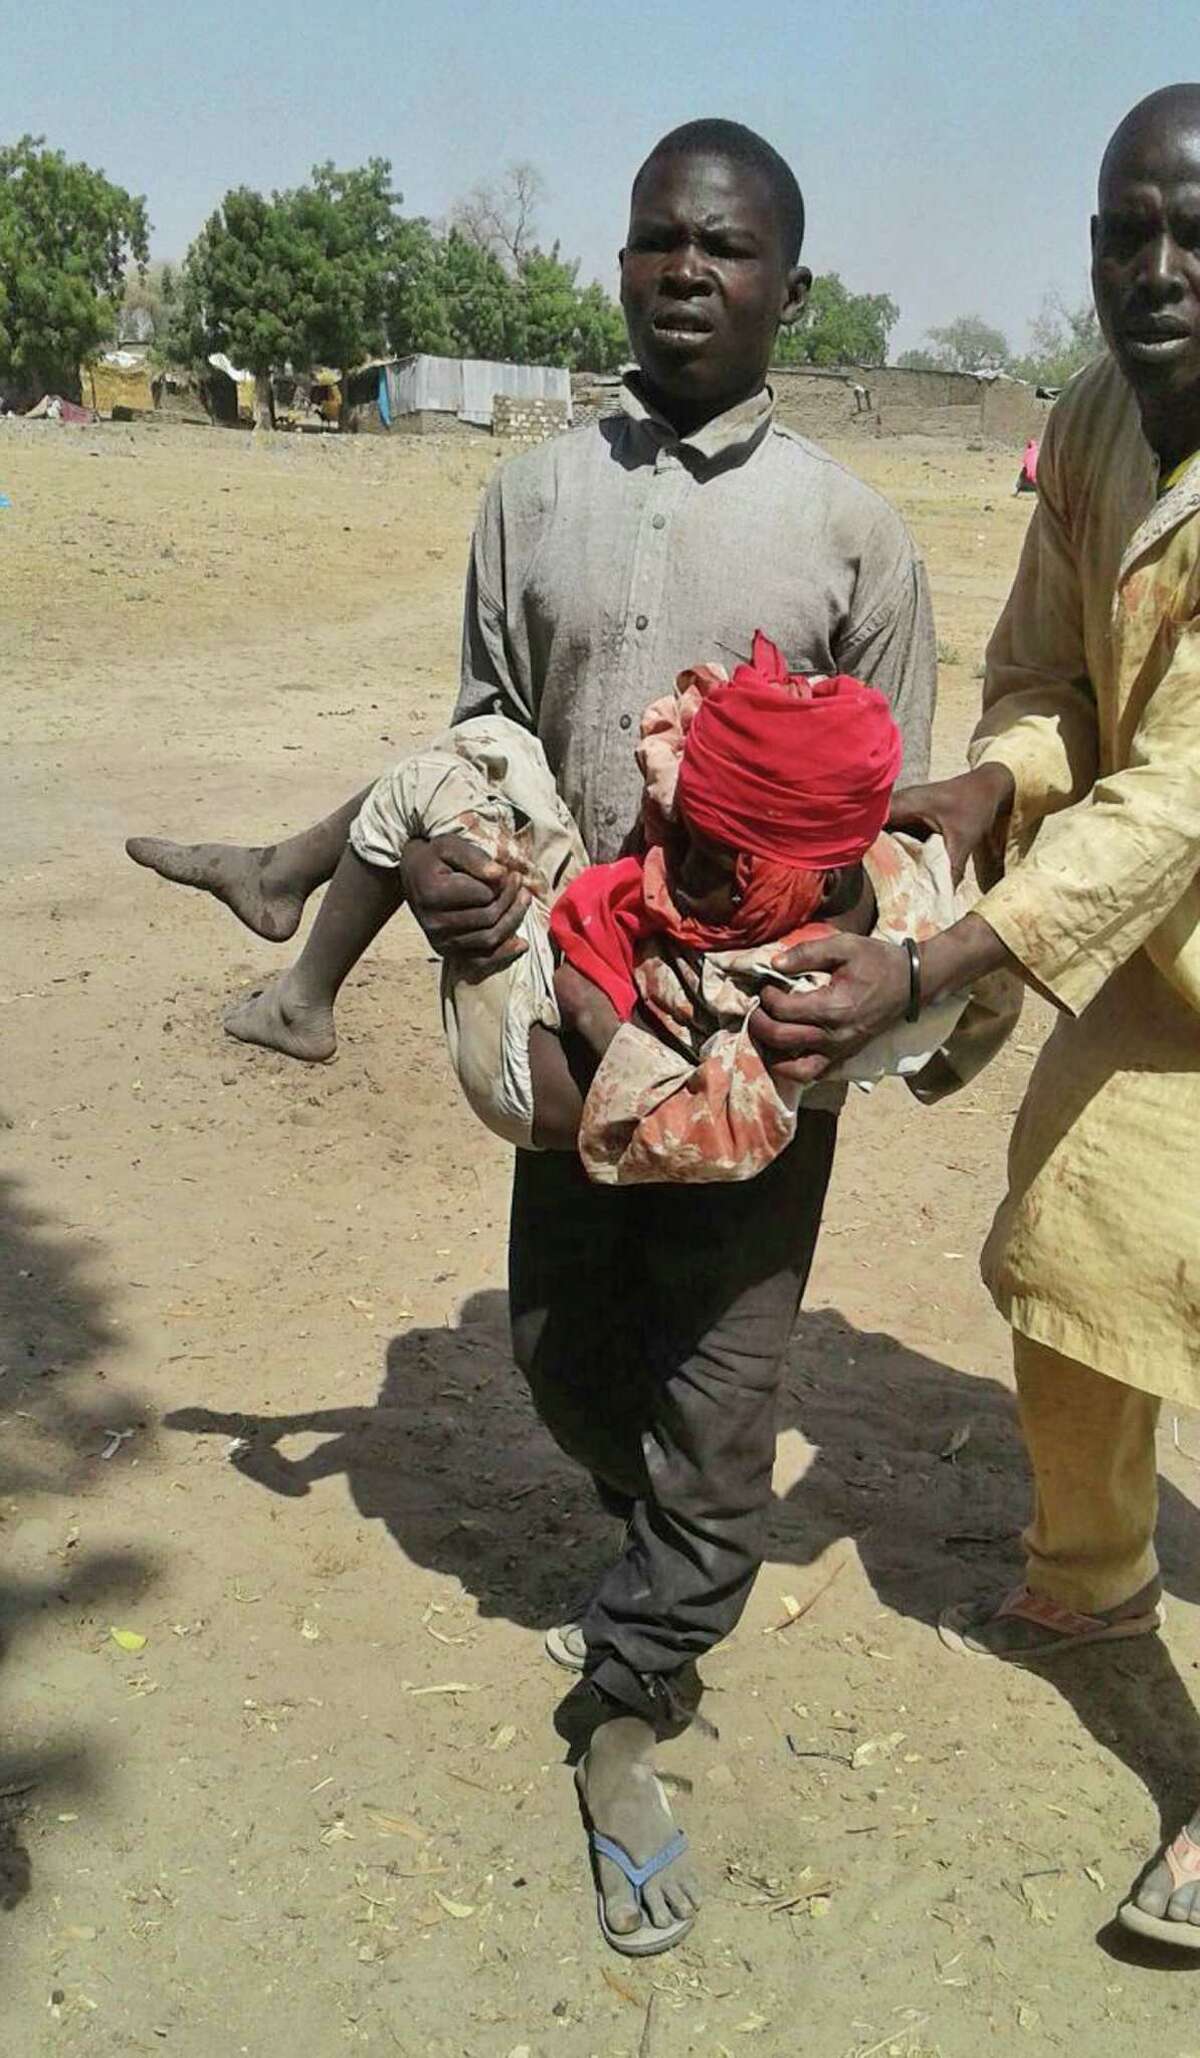 In this image supplied by MSF, a man carries an injured child following a military air strike at a camp for displaced people in Rann, Nigeria, Tuesday Jan. 17, 2017. Relief volunteers are believed to be among the more than 100 dead after a Nigerian Air Force jet fighter mistakenly bombed the refugee camp, while on a mission against Boko Haram extremists. Medical condition of the child unknown. (Medecins Sans Frontieres (MSF) via AP)